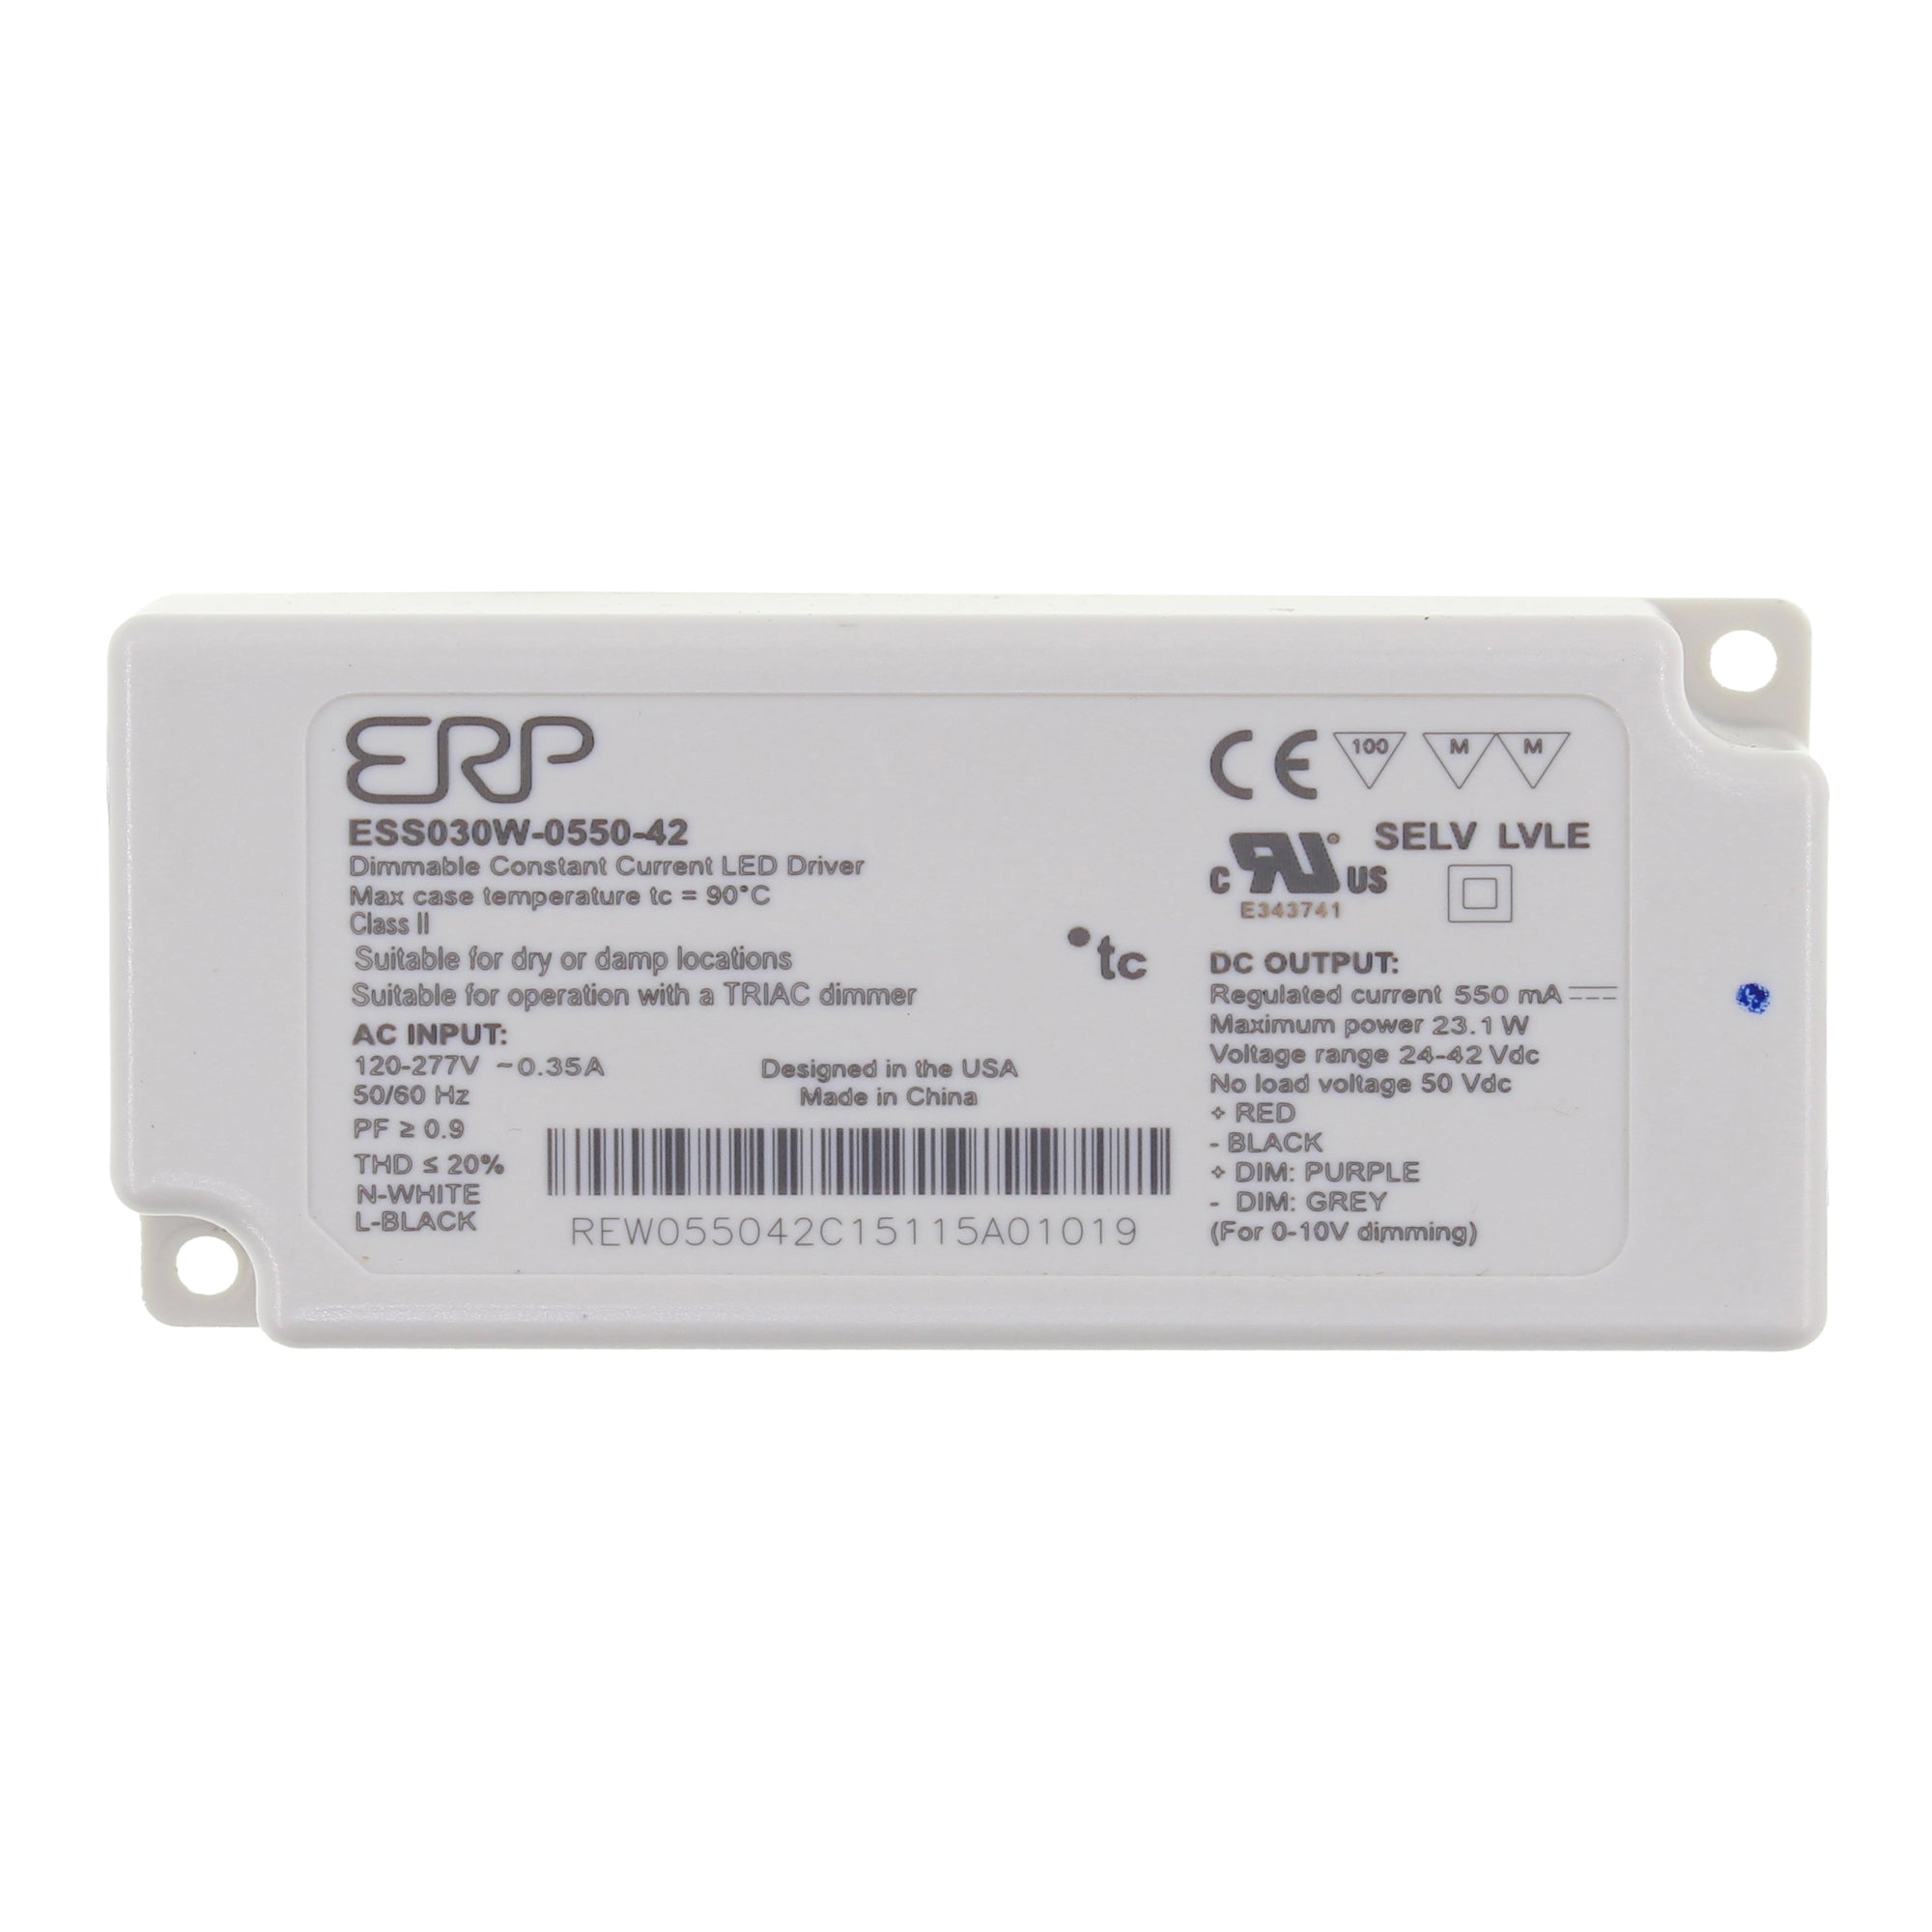 ERP Power LLC, ERP ESS030W-0550-42 DIMMABLE SELV CONSTANT CURRENT LED DRIVER 30W, 24-42V 550MA